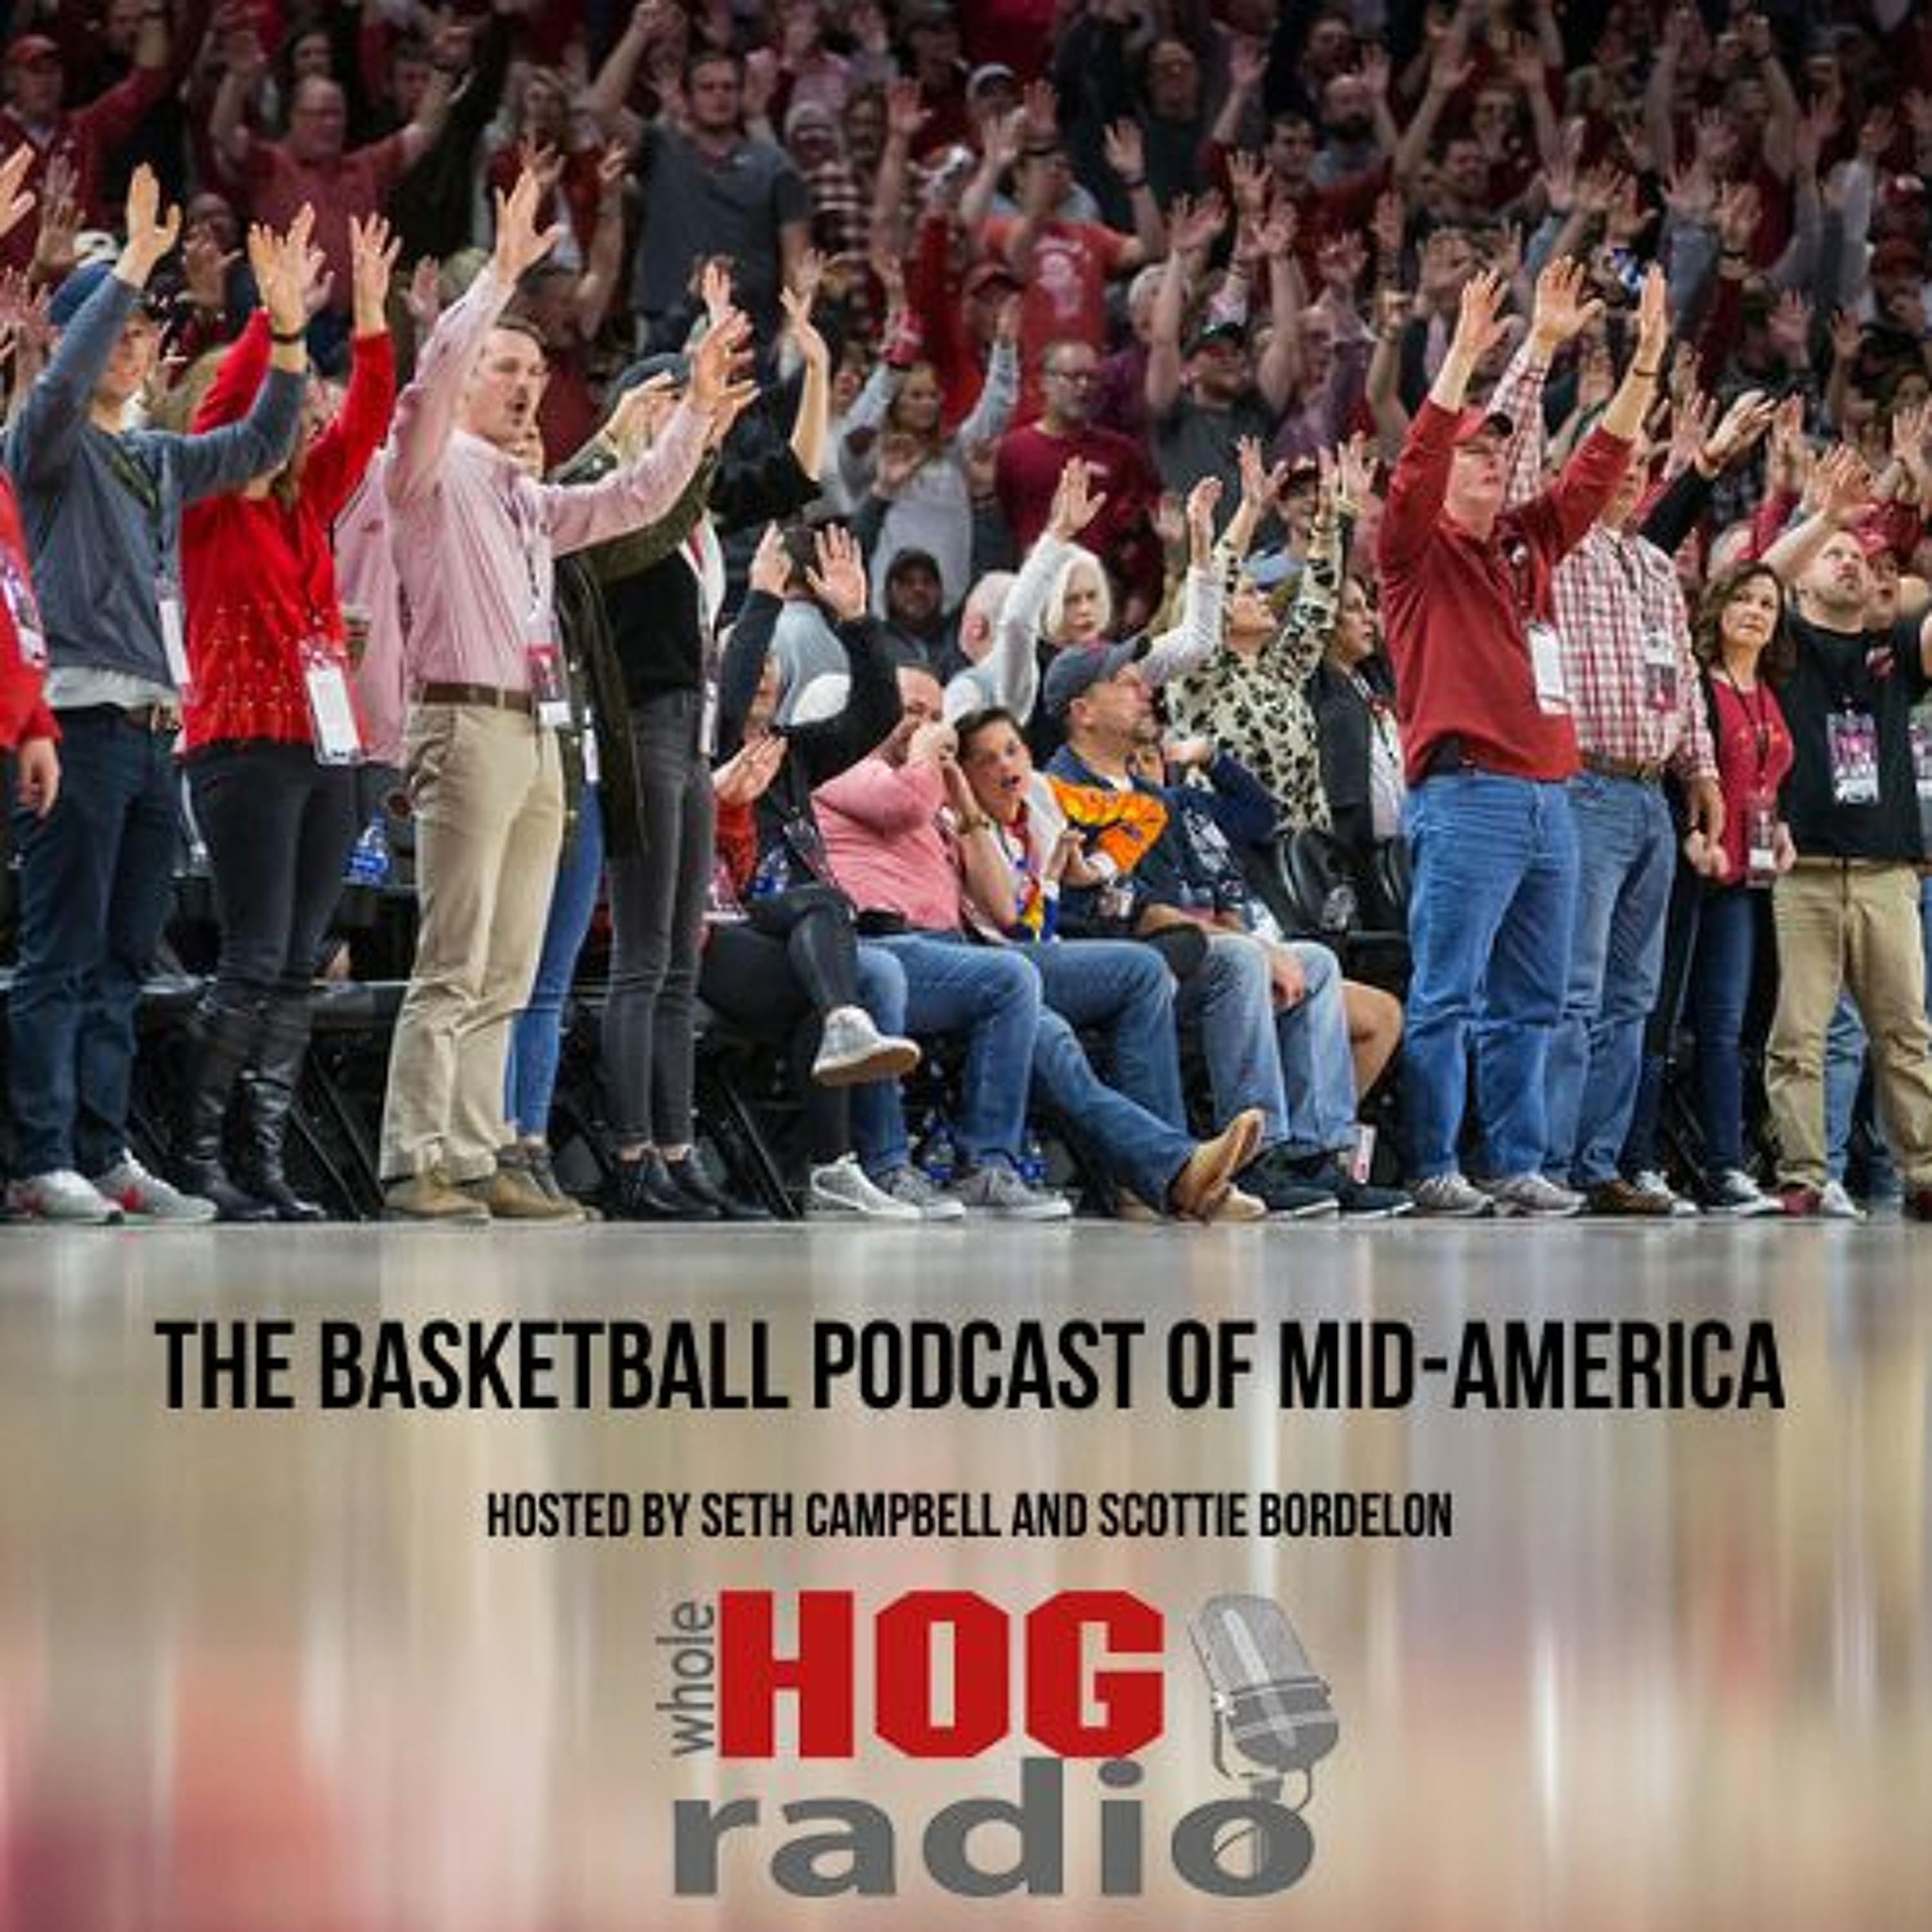 WHS Presents - The Basketball Podcast of Mid-America: Hogs win 2 straight with Joe back